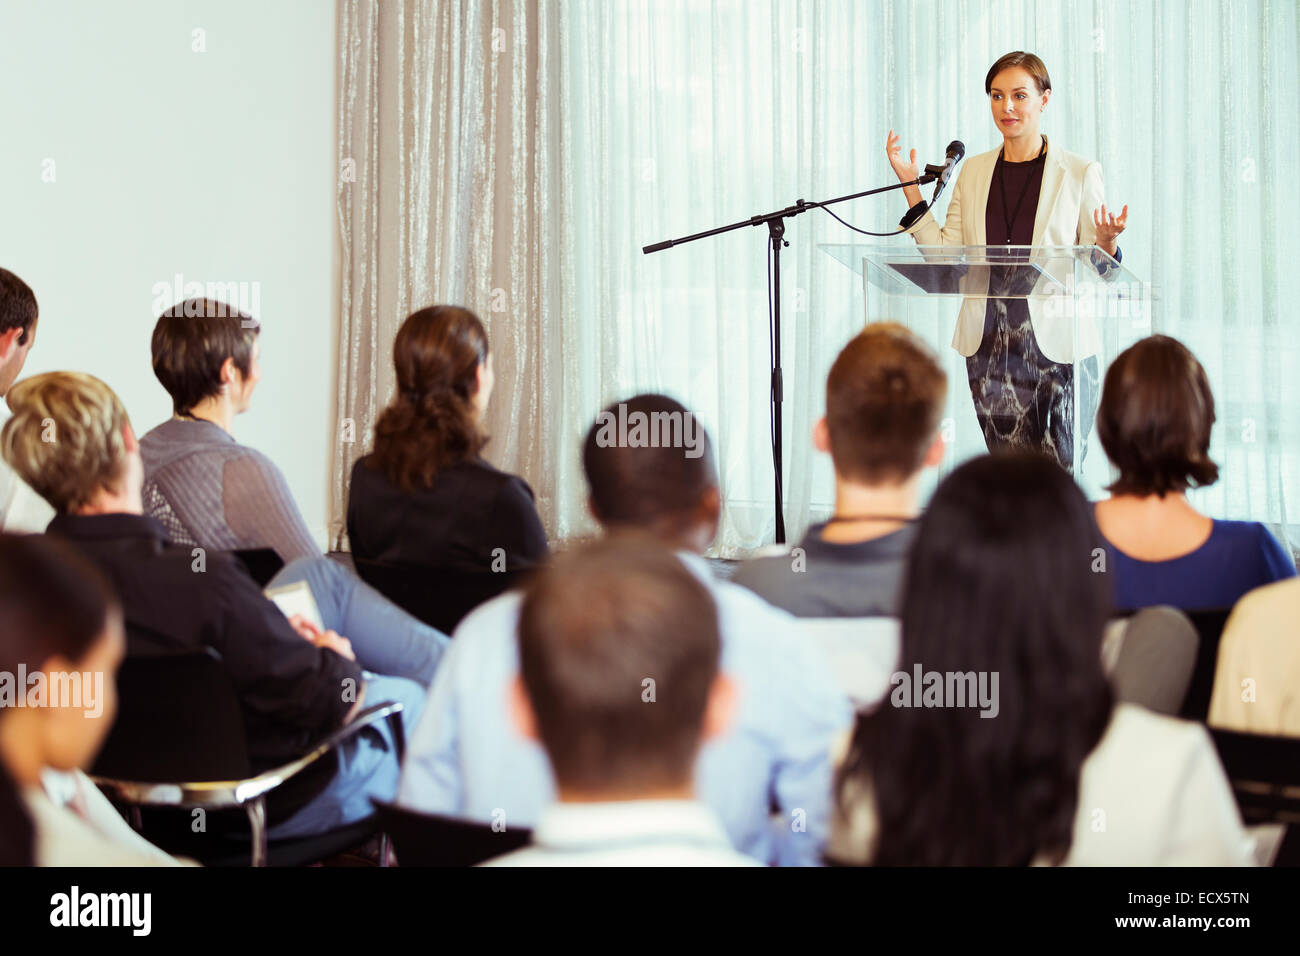 Businesswoman giving presentation in conference room Banque D'Images